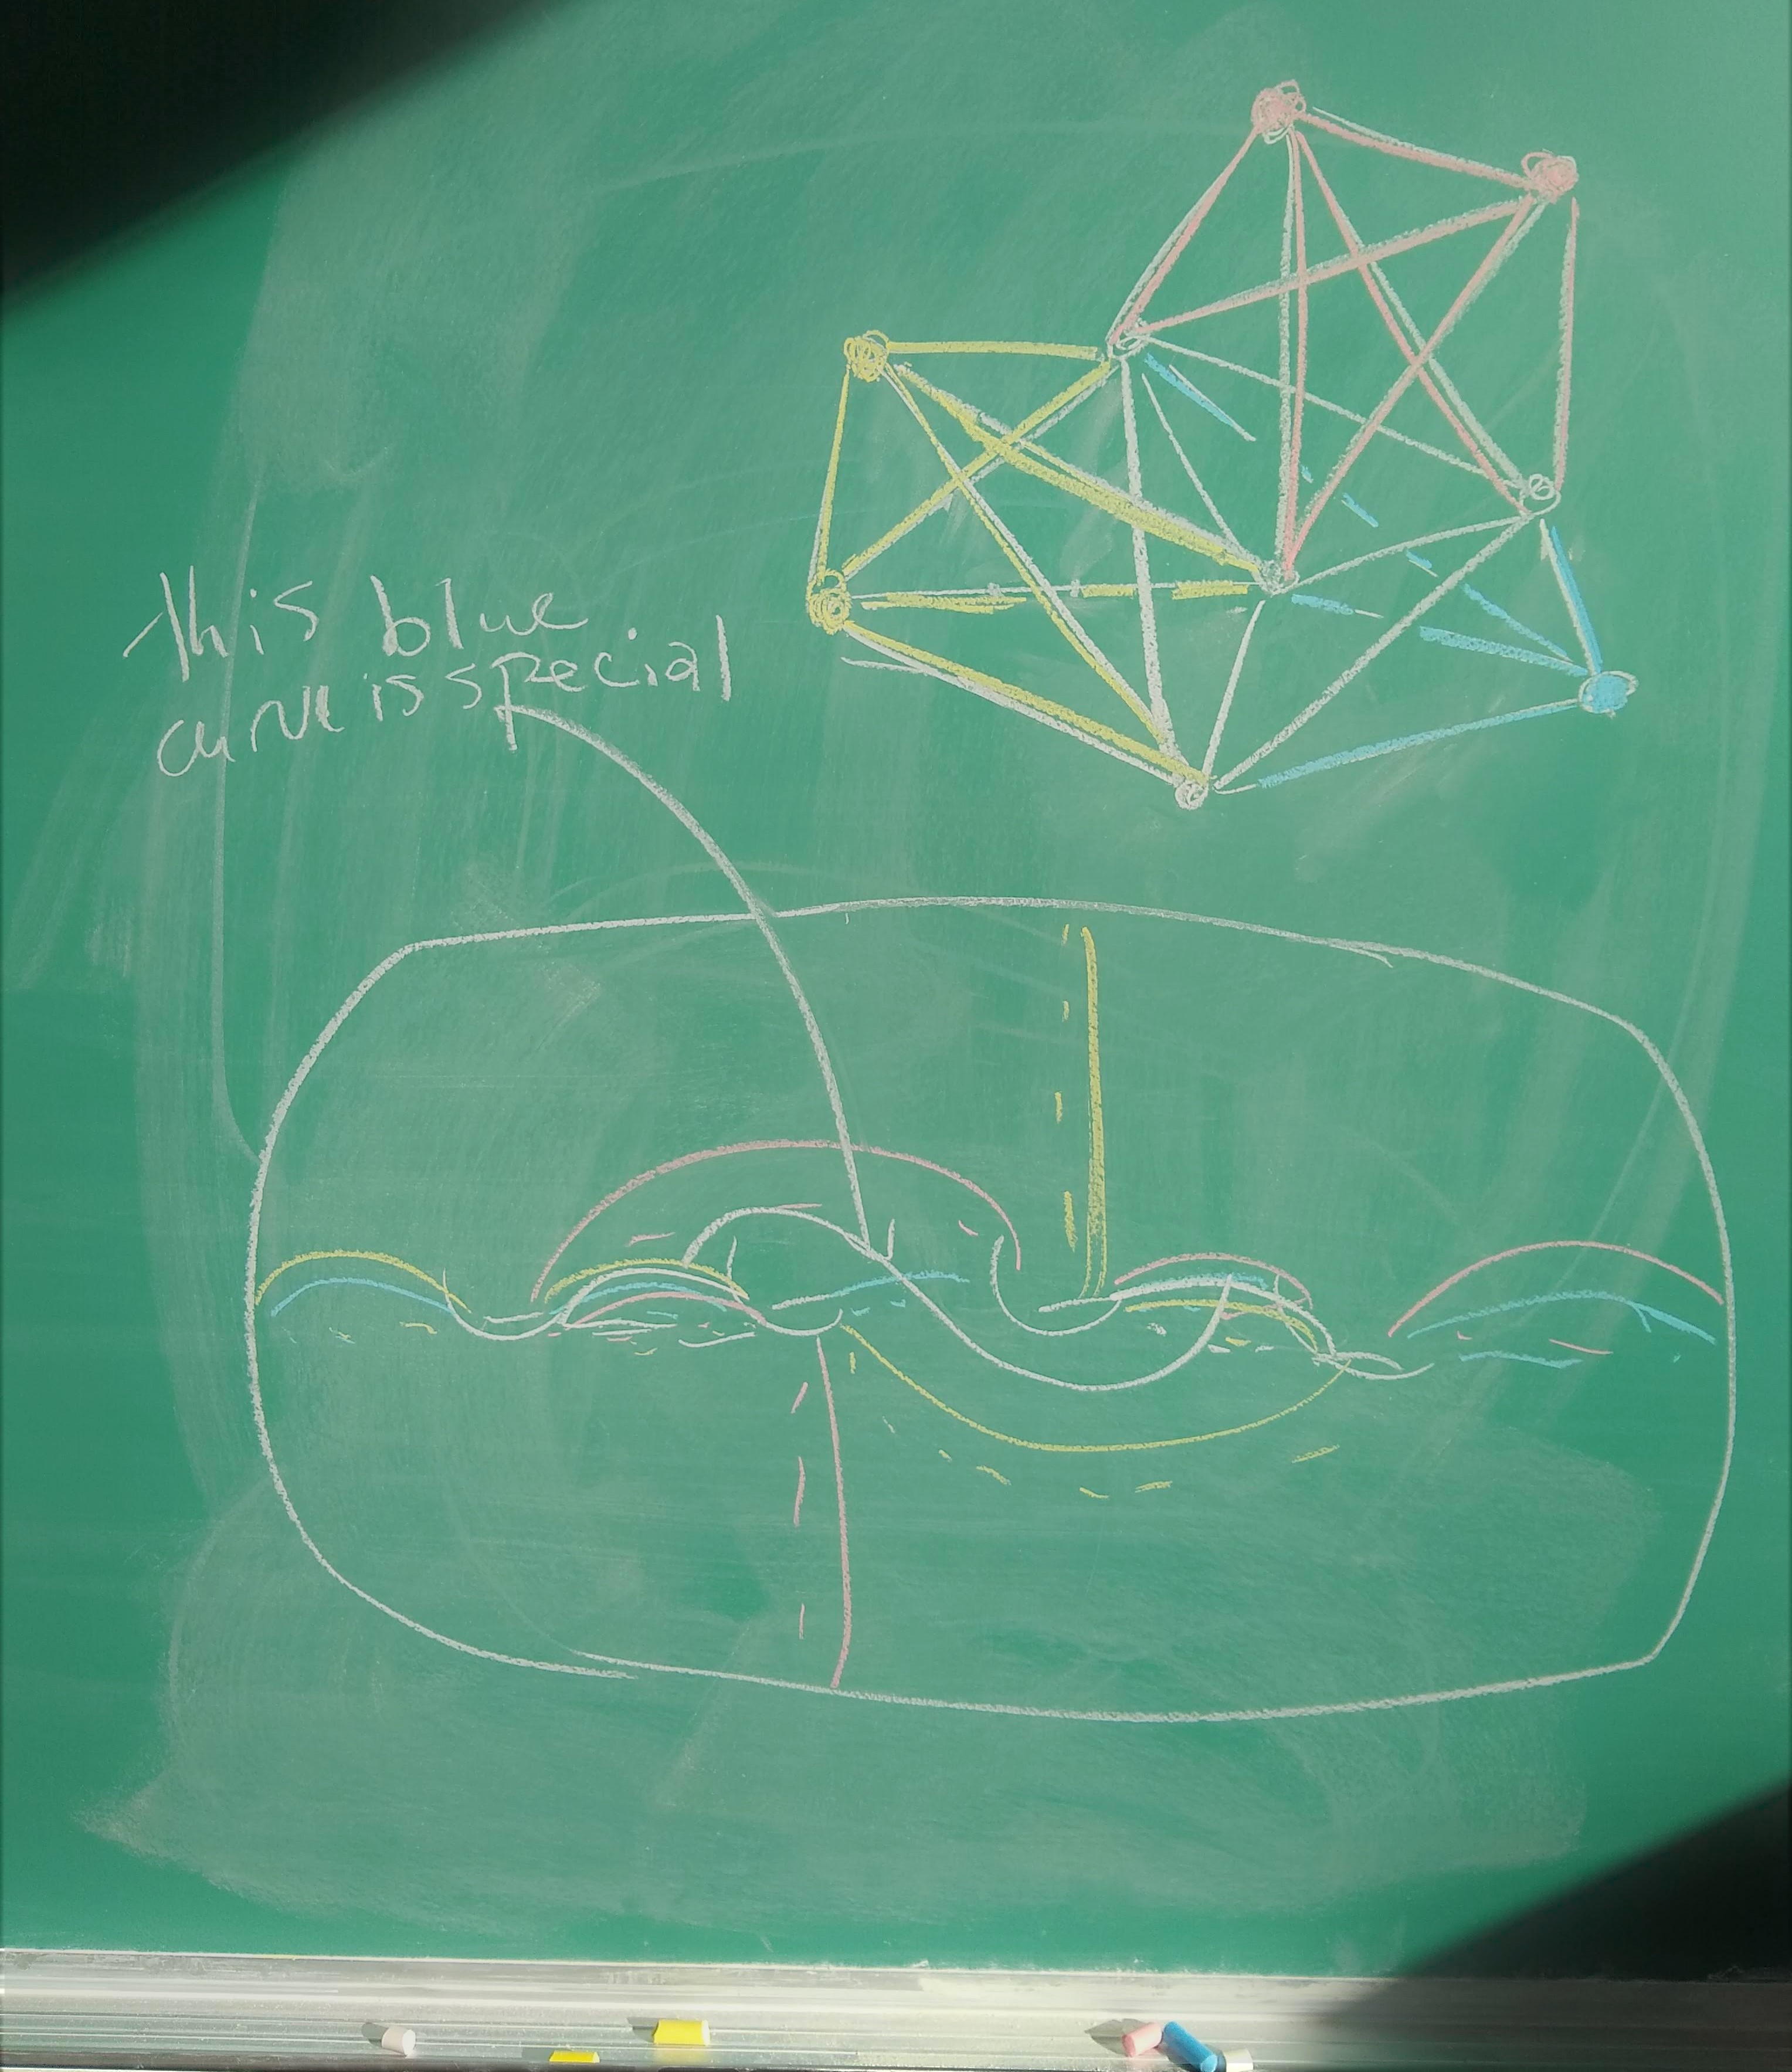 Chalkboard with drawing of curves on surface